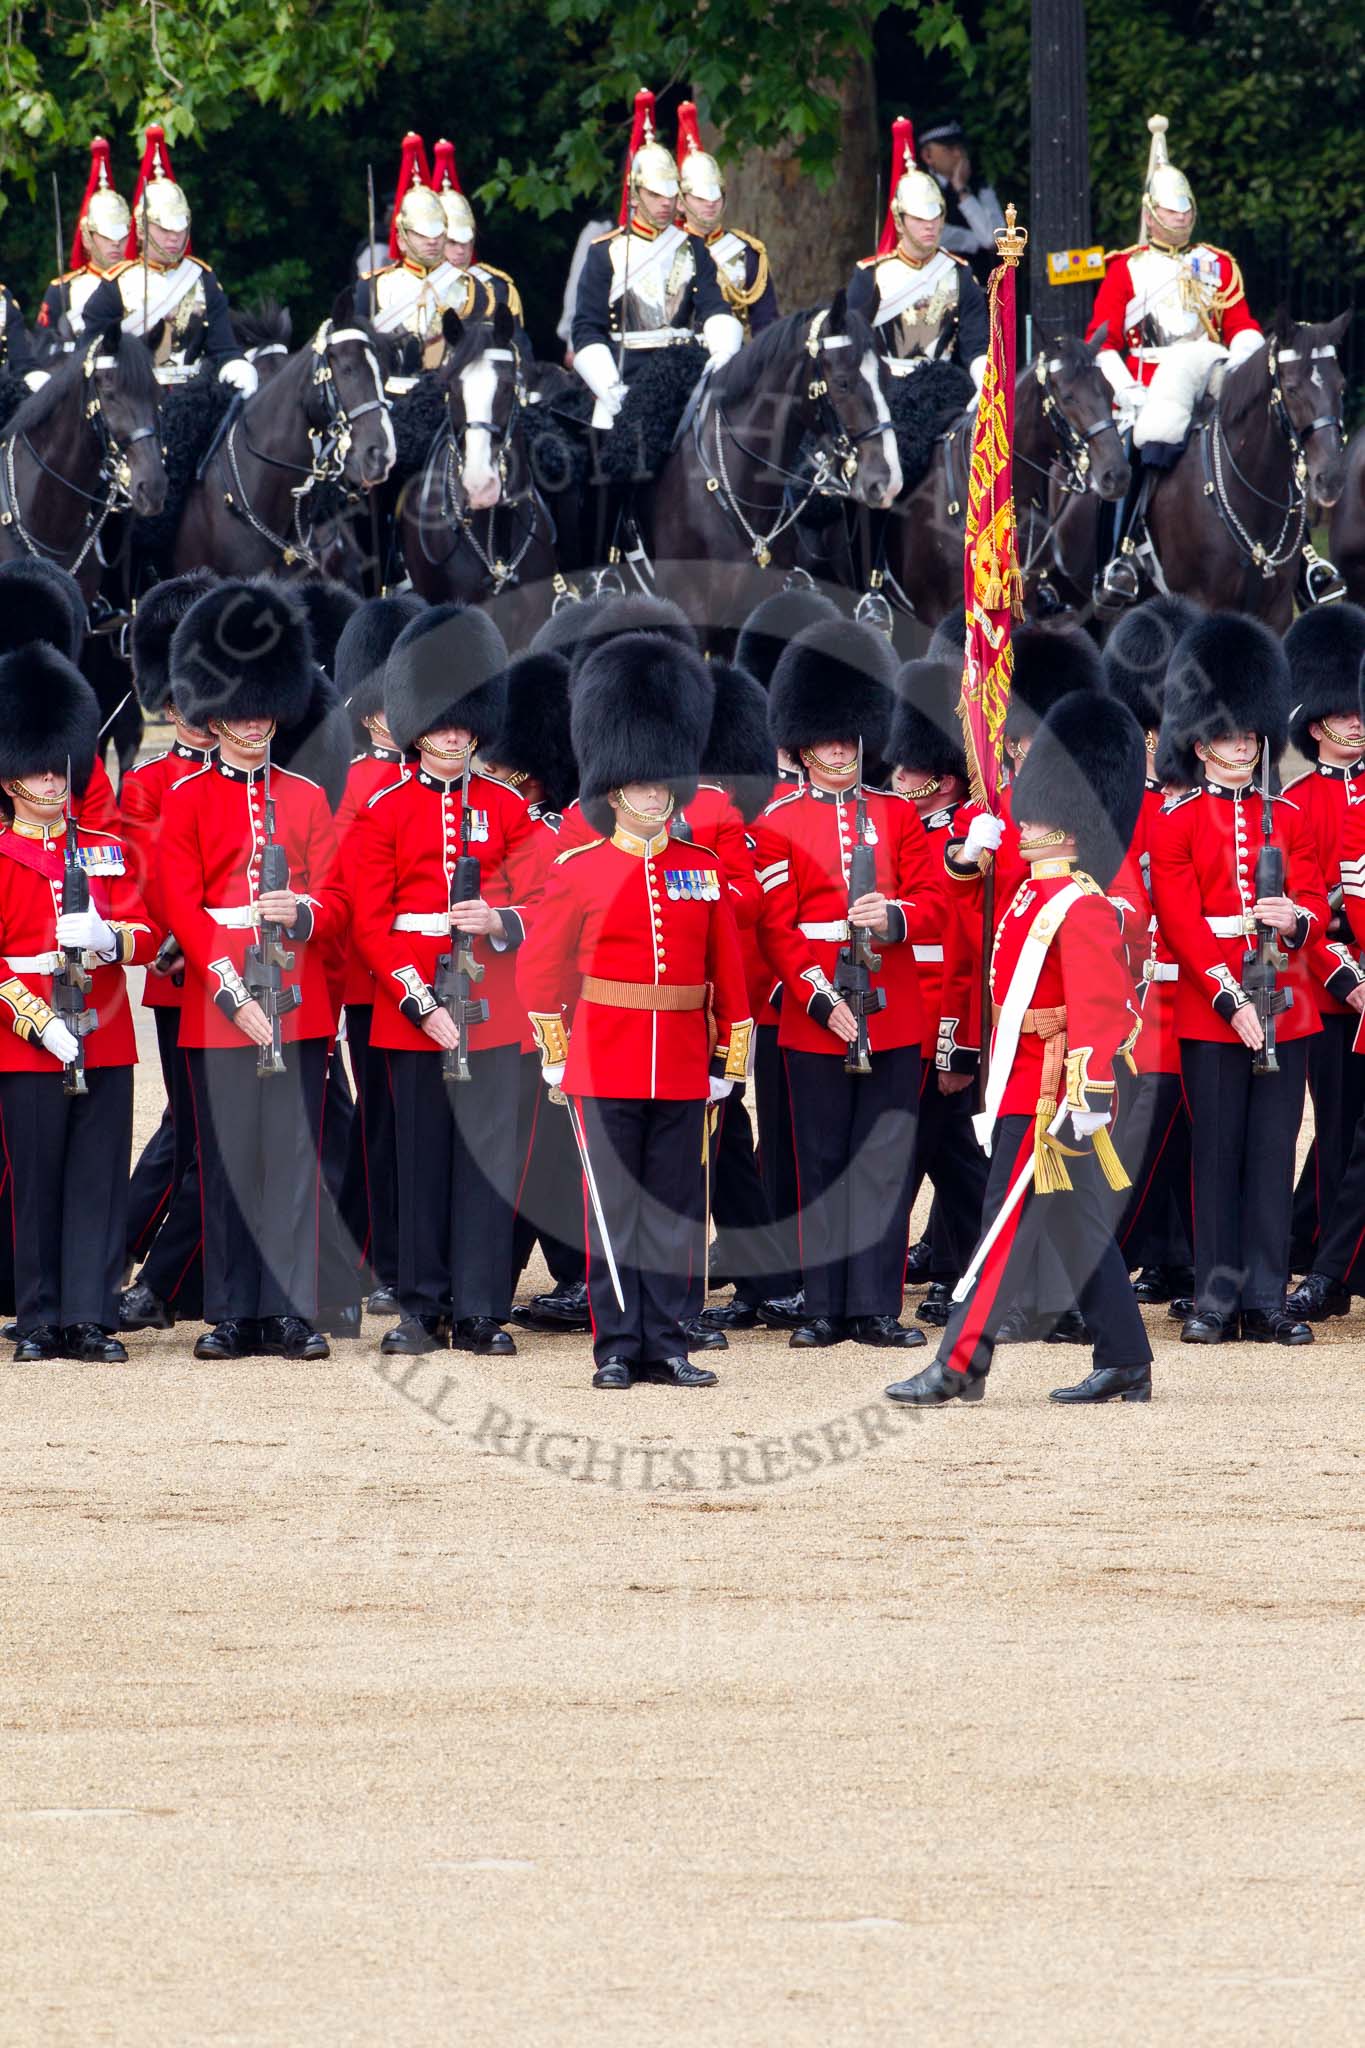 The Colonel's Review 2011: The Esnsign, Tom Ogilvy, is marching in front of the line of guards (here No. 4 Guard, Nijmegen Company Grenadier Guards, whilst the other guardsmen of the Escort are marching between the two lines of guards. In the background the Mounted Bands of the Household Cavalry..
Horse Guards Parade, Westminster,
London SW1,

United Kingdom,
on 04 June 2011 at 11:25, image #145